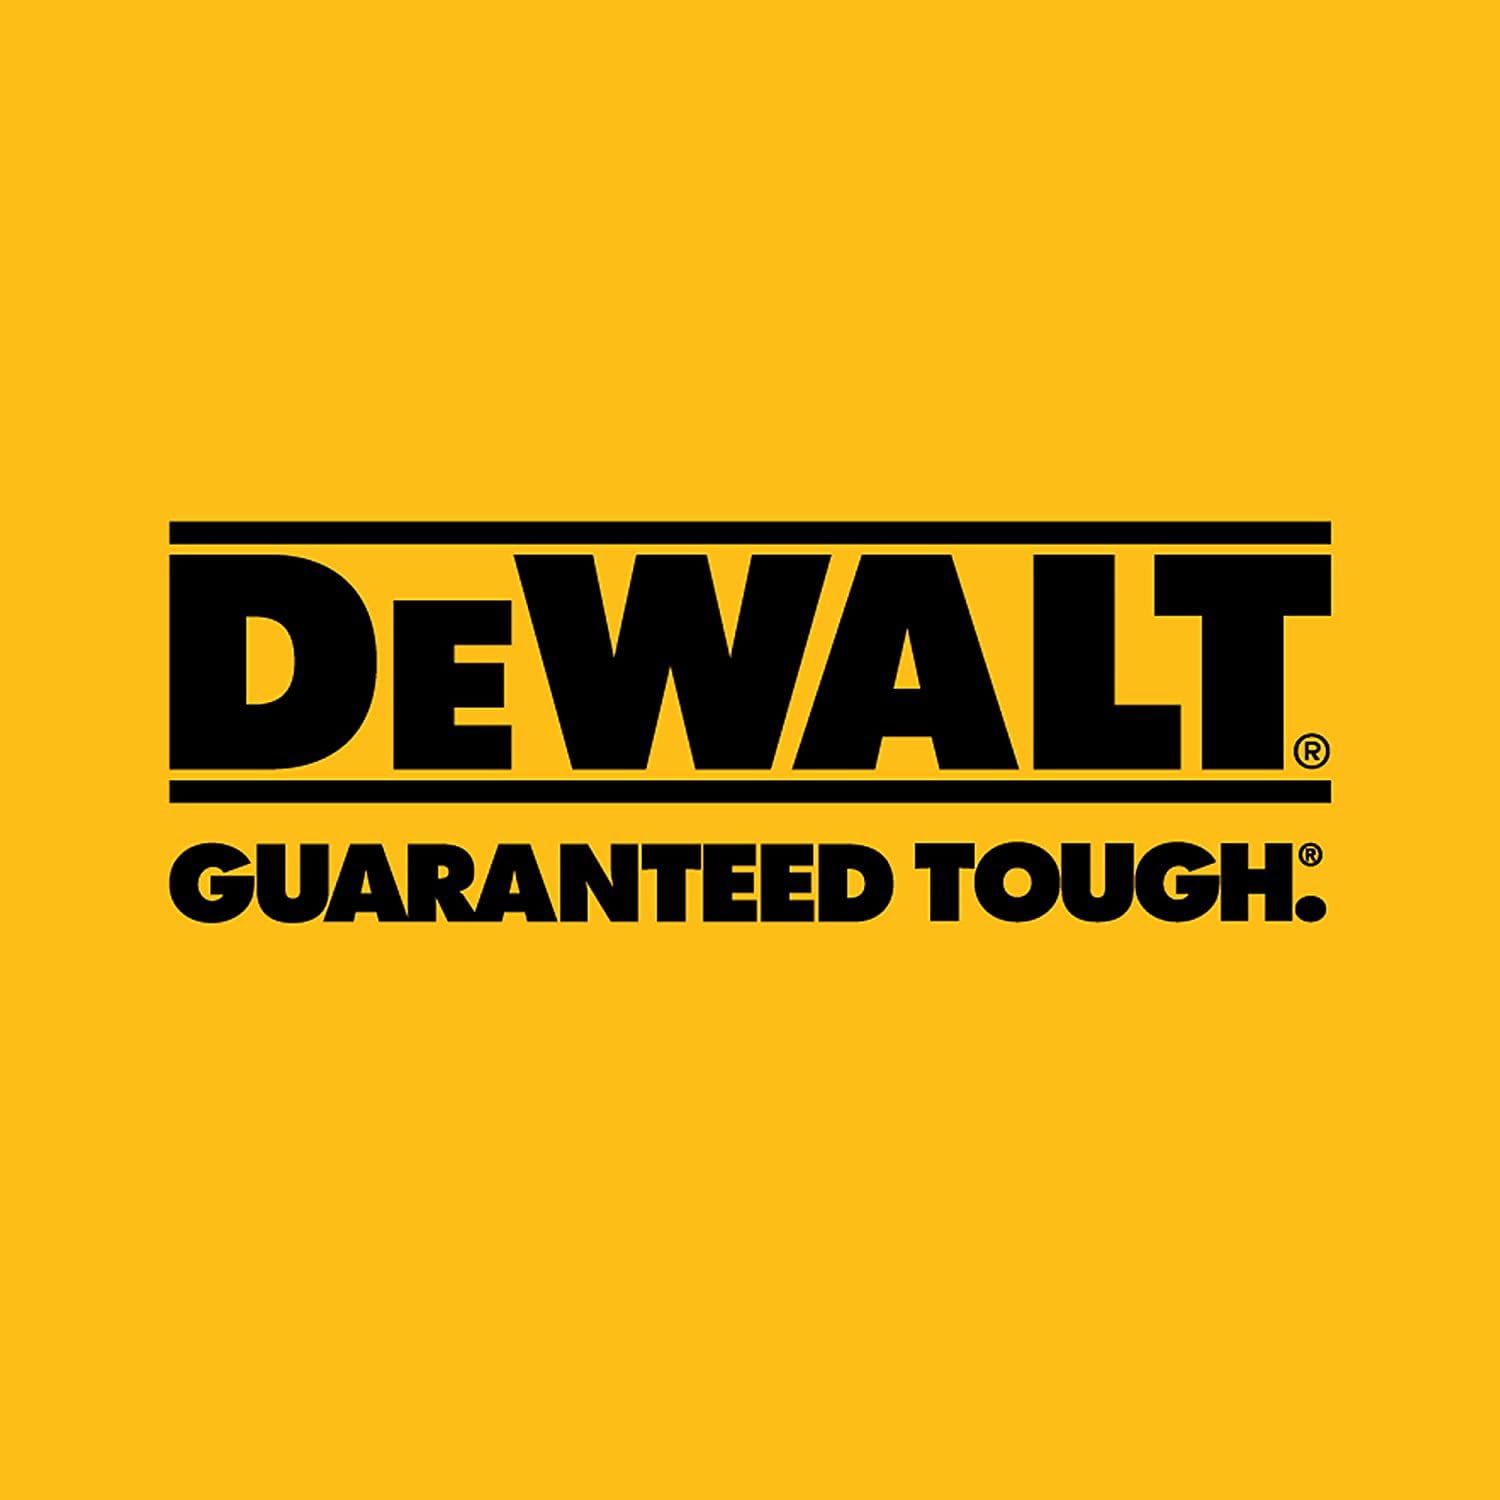 DEWALT TOUGHSYSTEM 2.0, Extra Large Tool Box, 22 in., 123 lbs. Capacity  DWST08400 